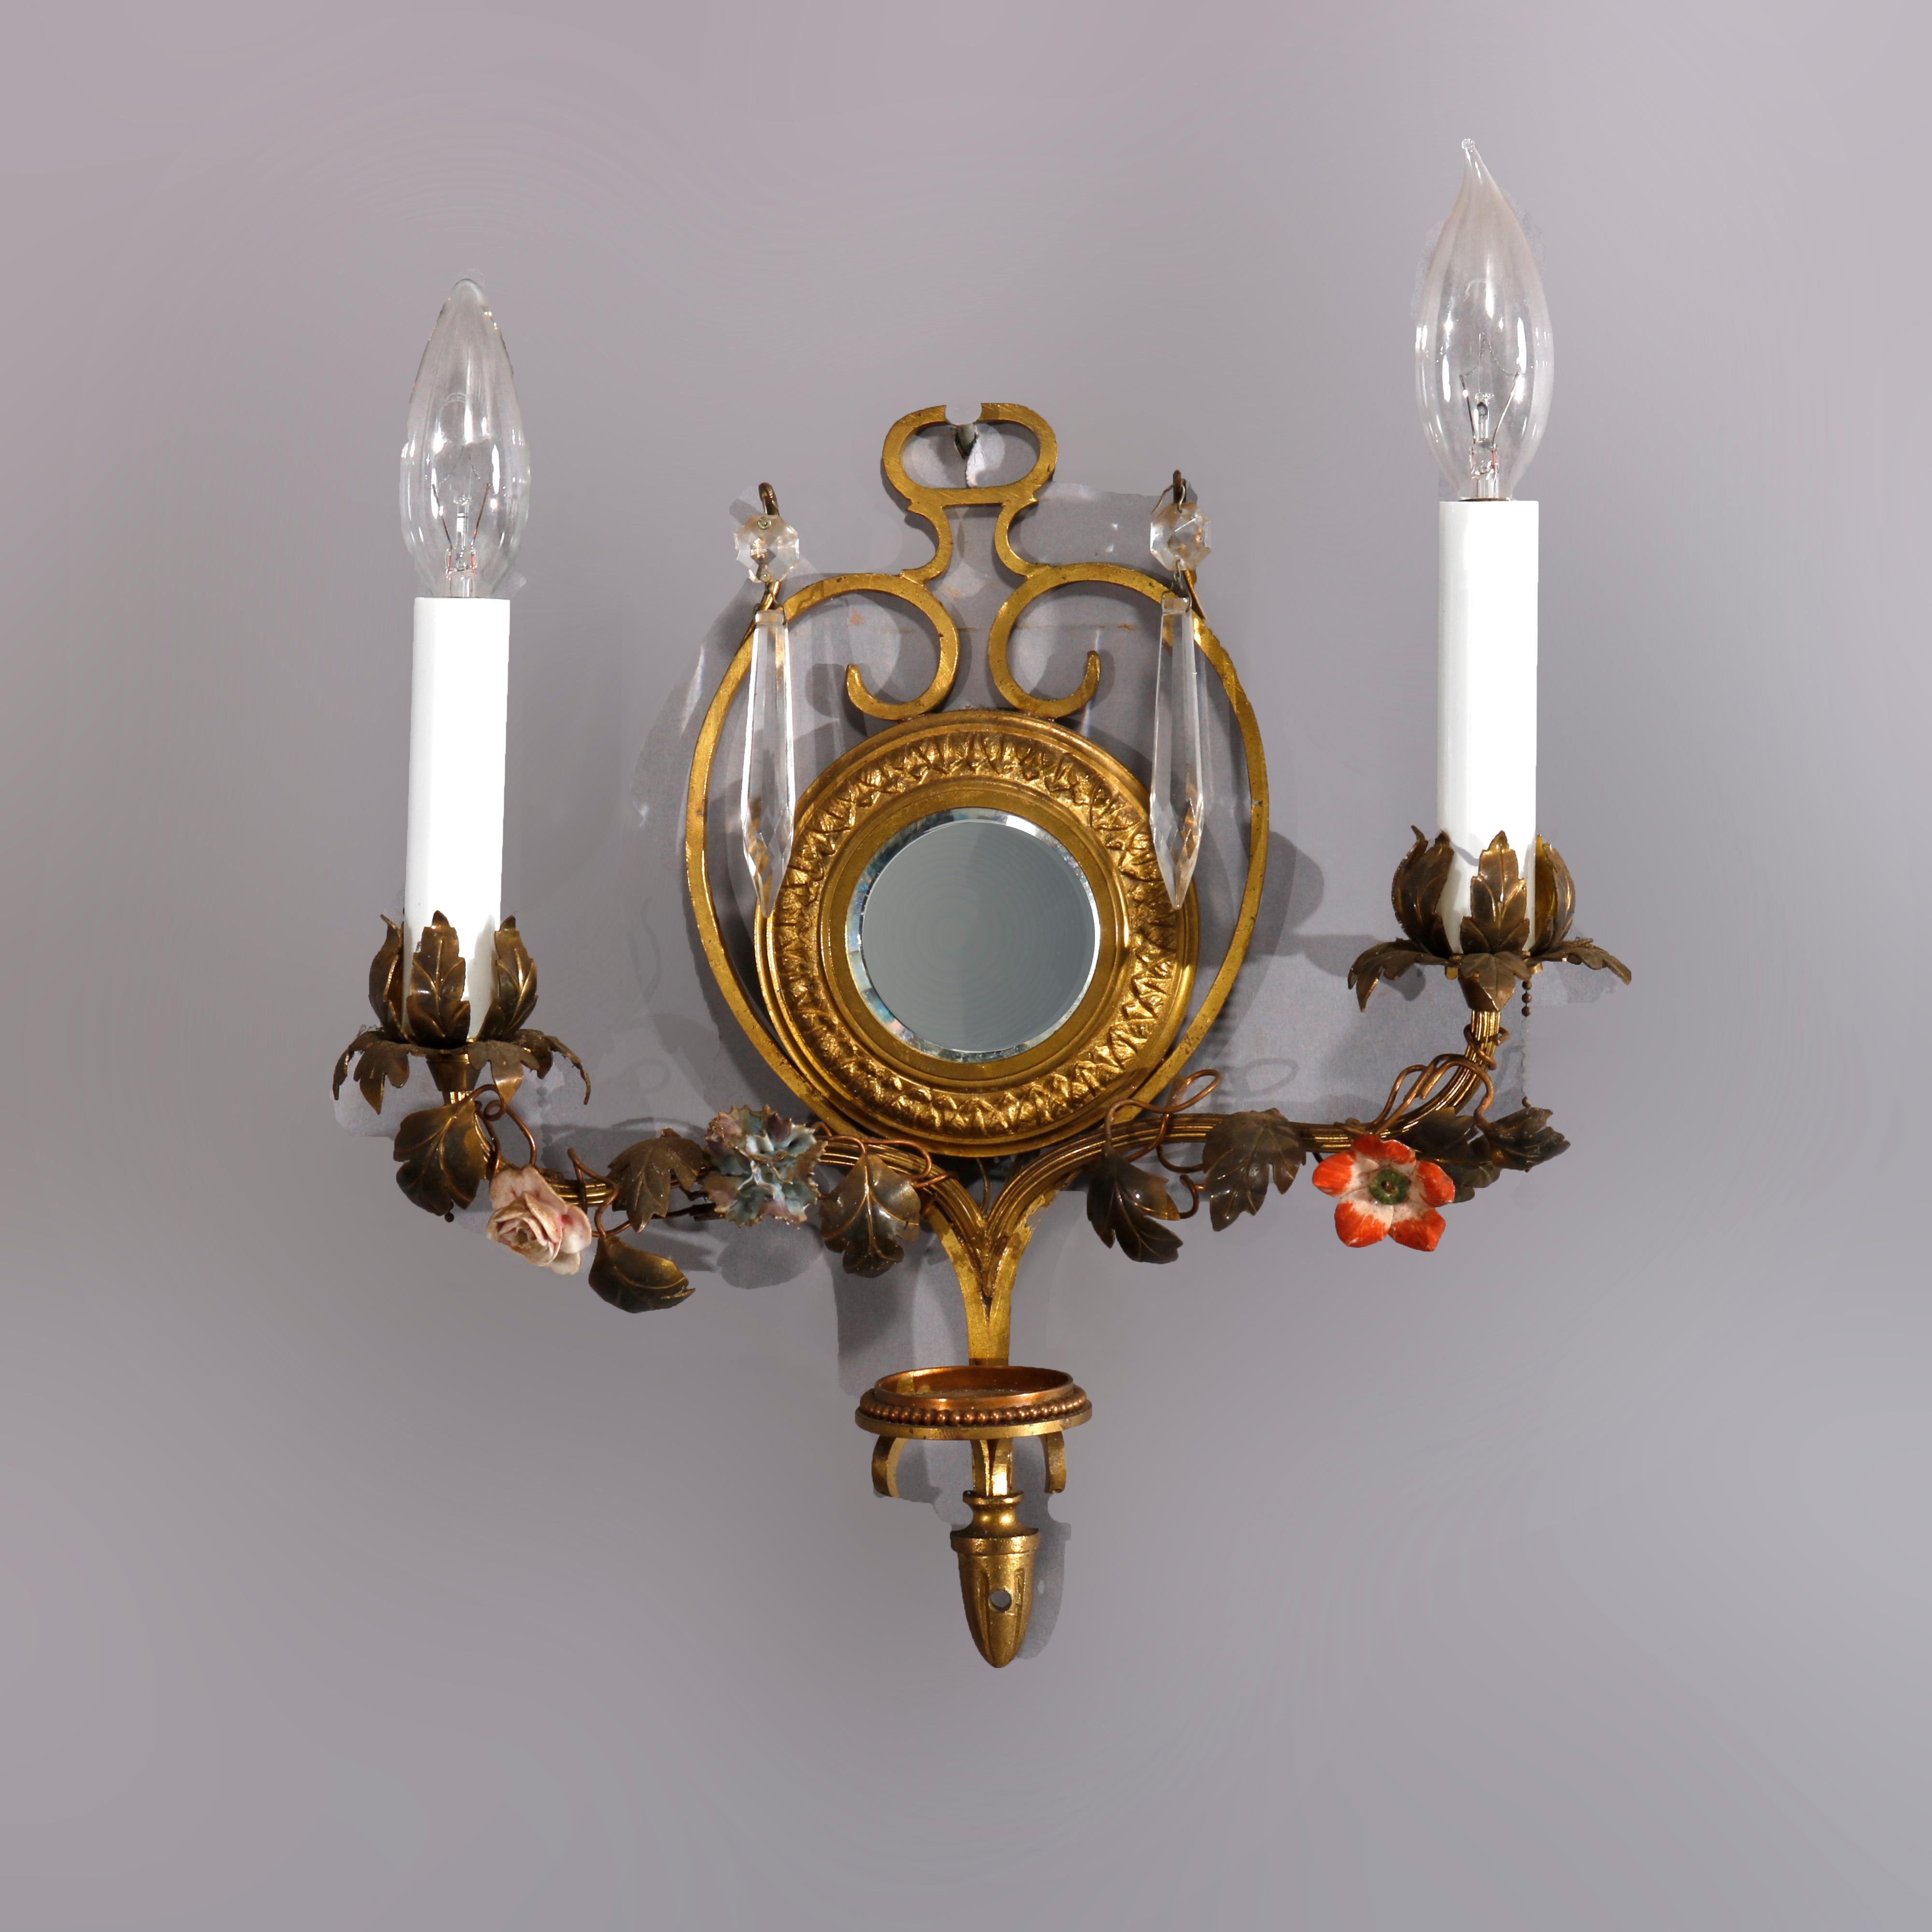 An antique French pair of wall sconces offer gilt metal and brass construction with central beveled mirror having scroll form frames each having two arms with polychromed floral elements terminating in candle lights, circa 1910

Measures: 13.5